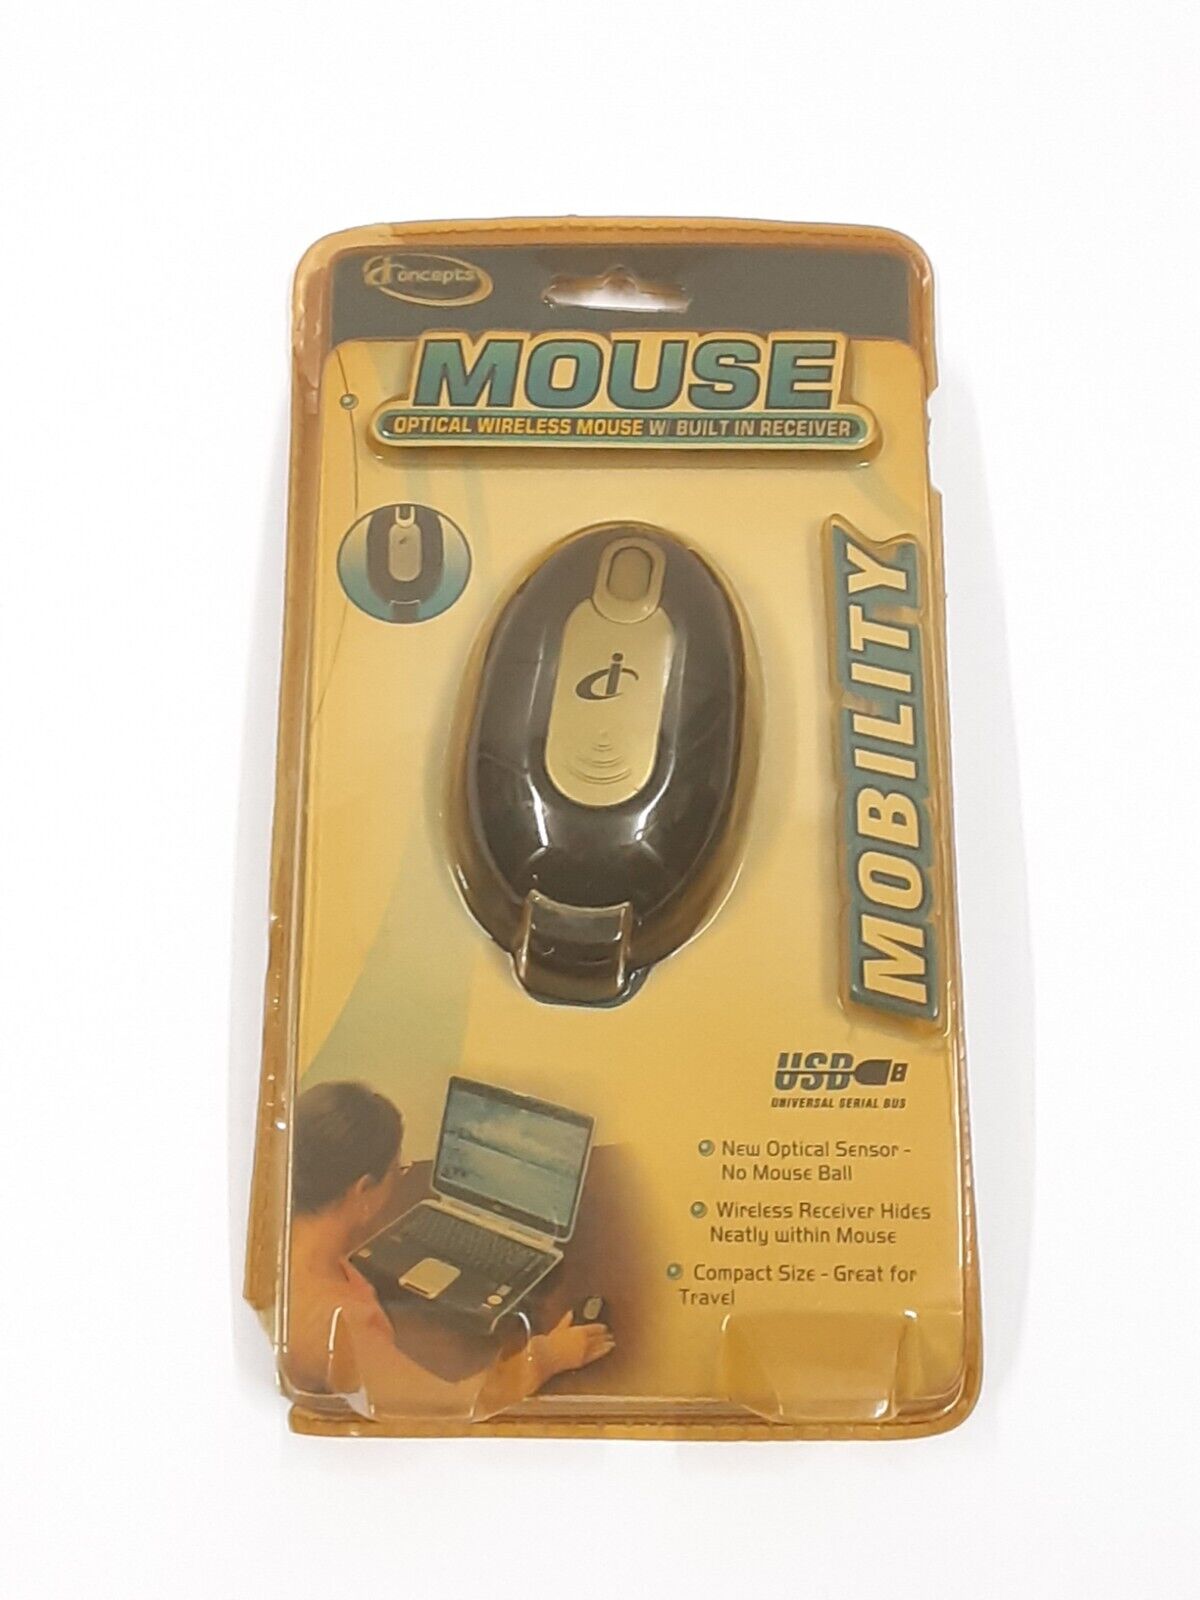 Sakar iConcepts Mobility Optical Wireless Mouse W/ Blt in Receiver M01717MB 2007